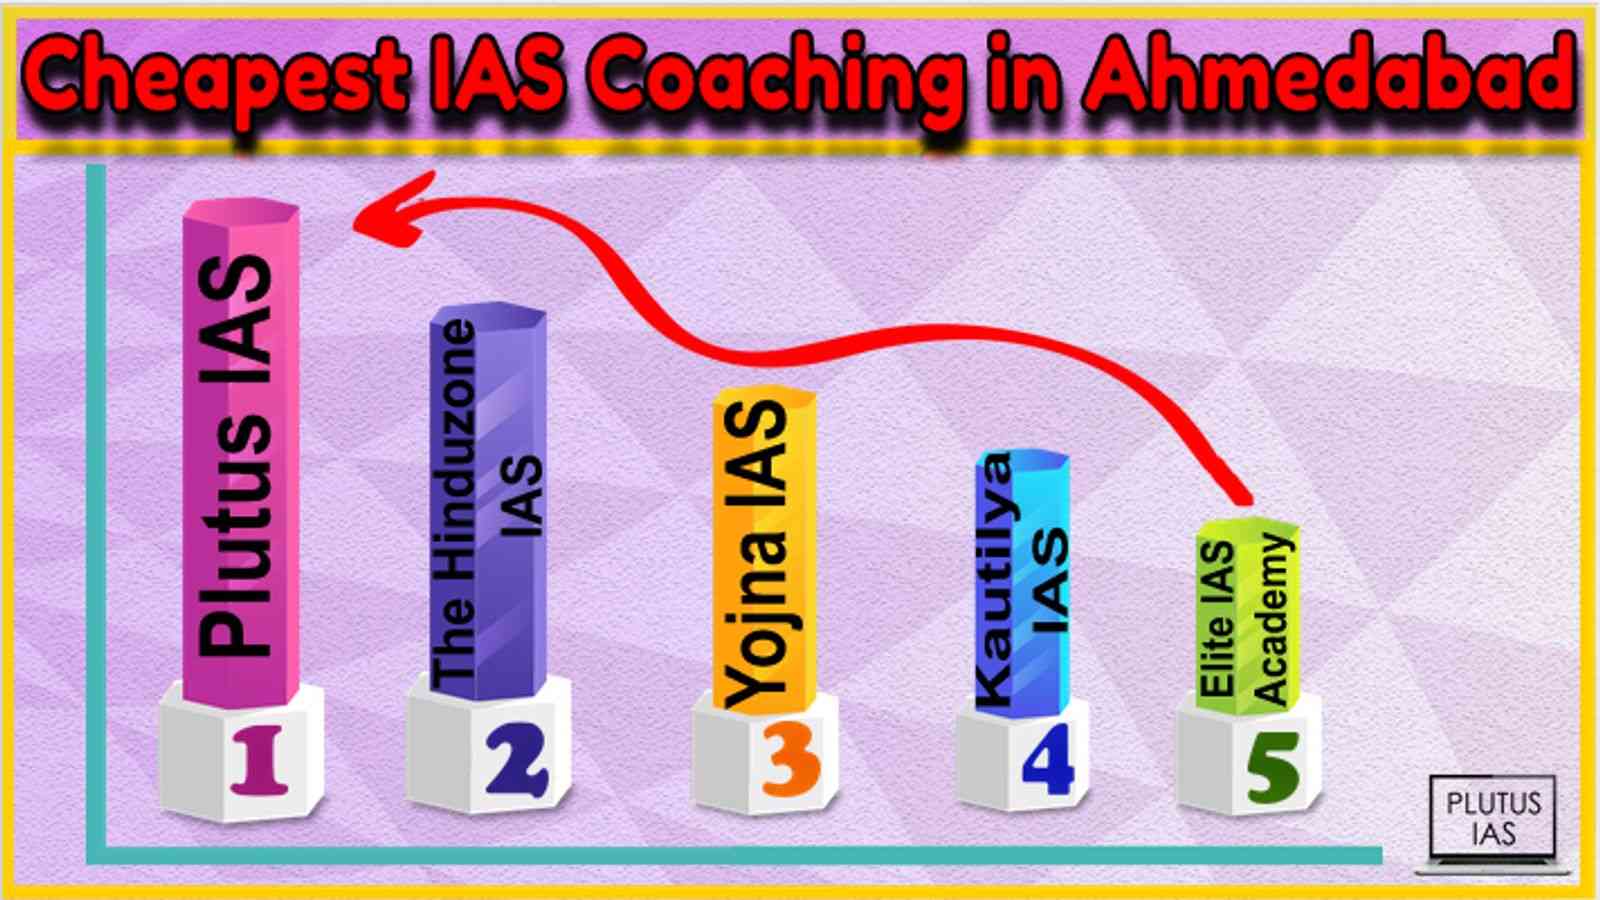 Cheapest IAS Coaching in Ahmedabad